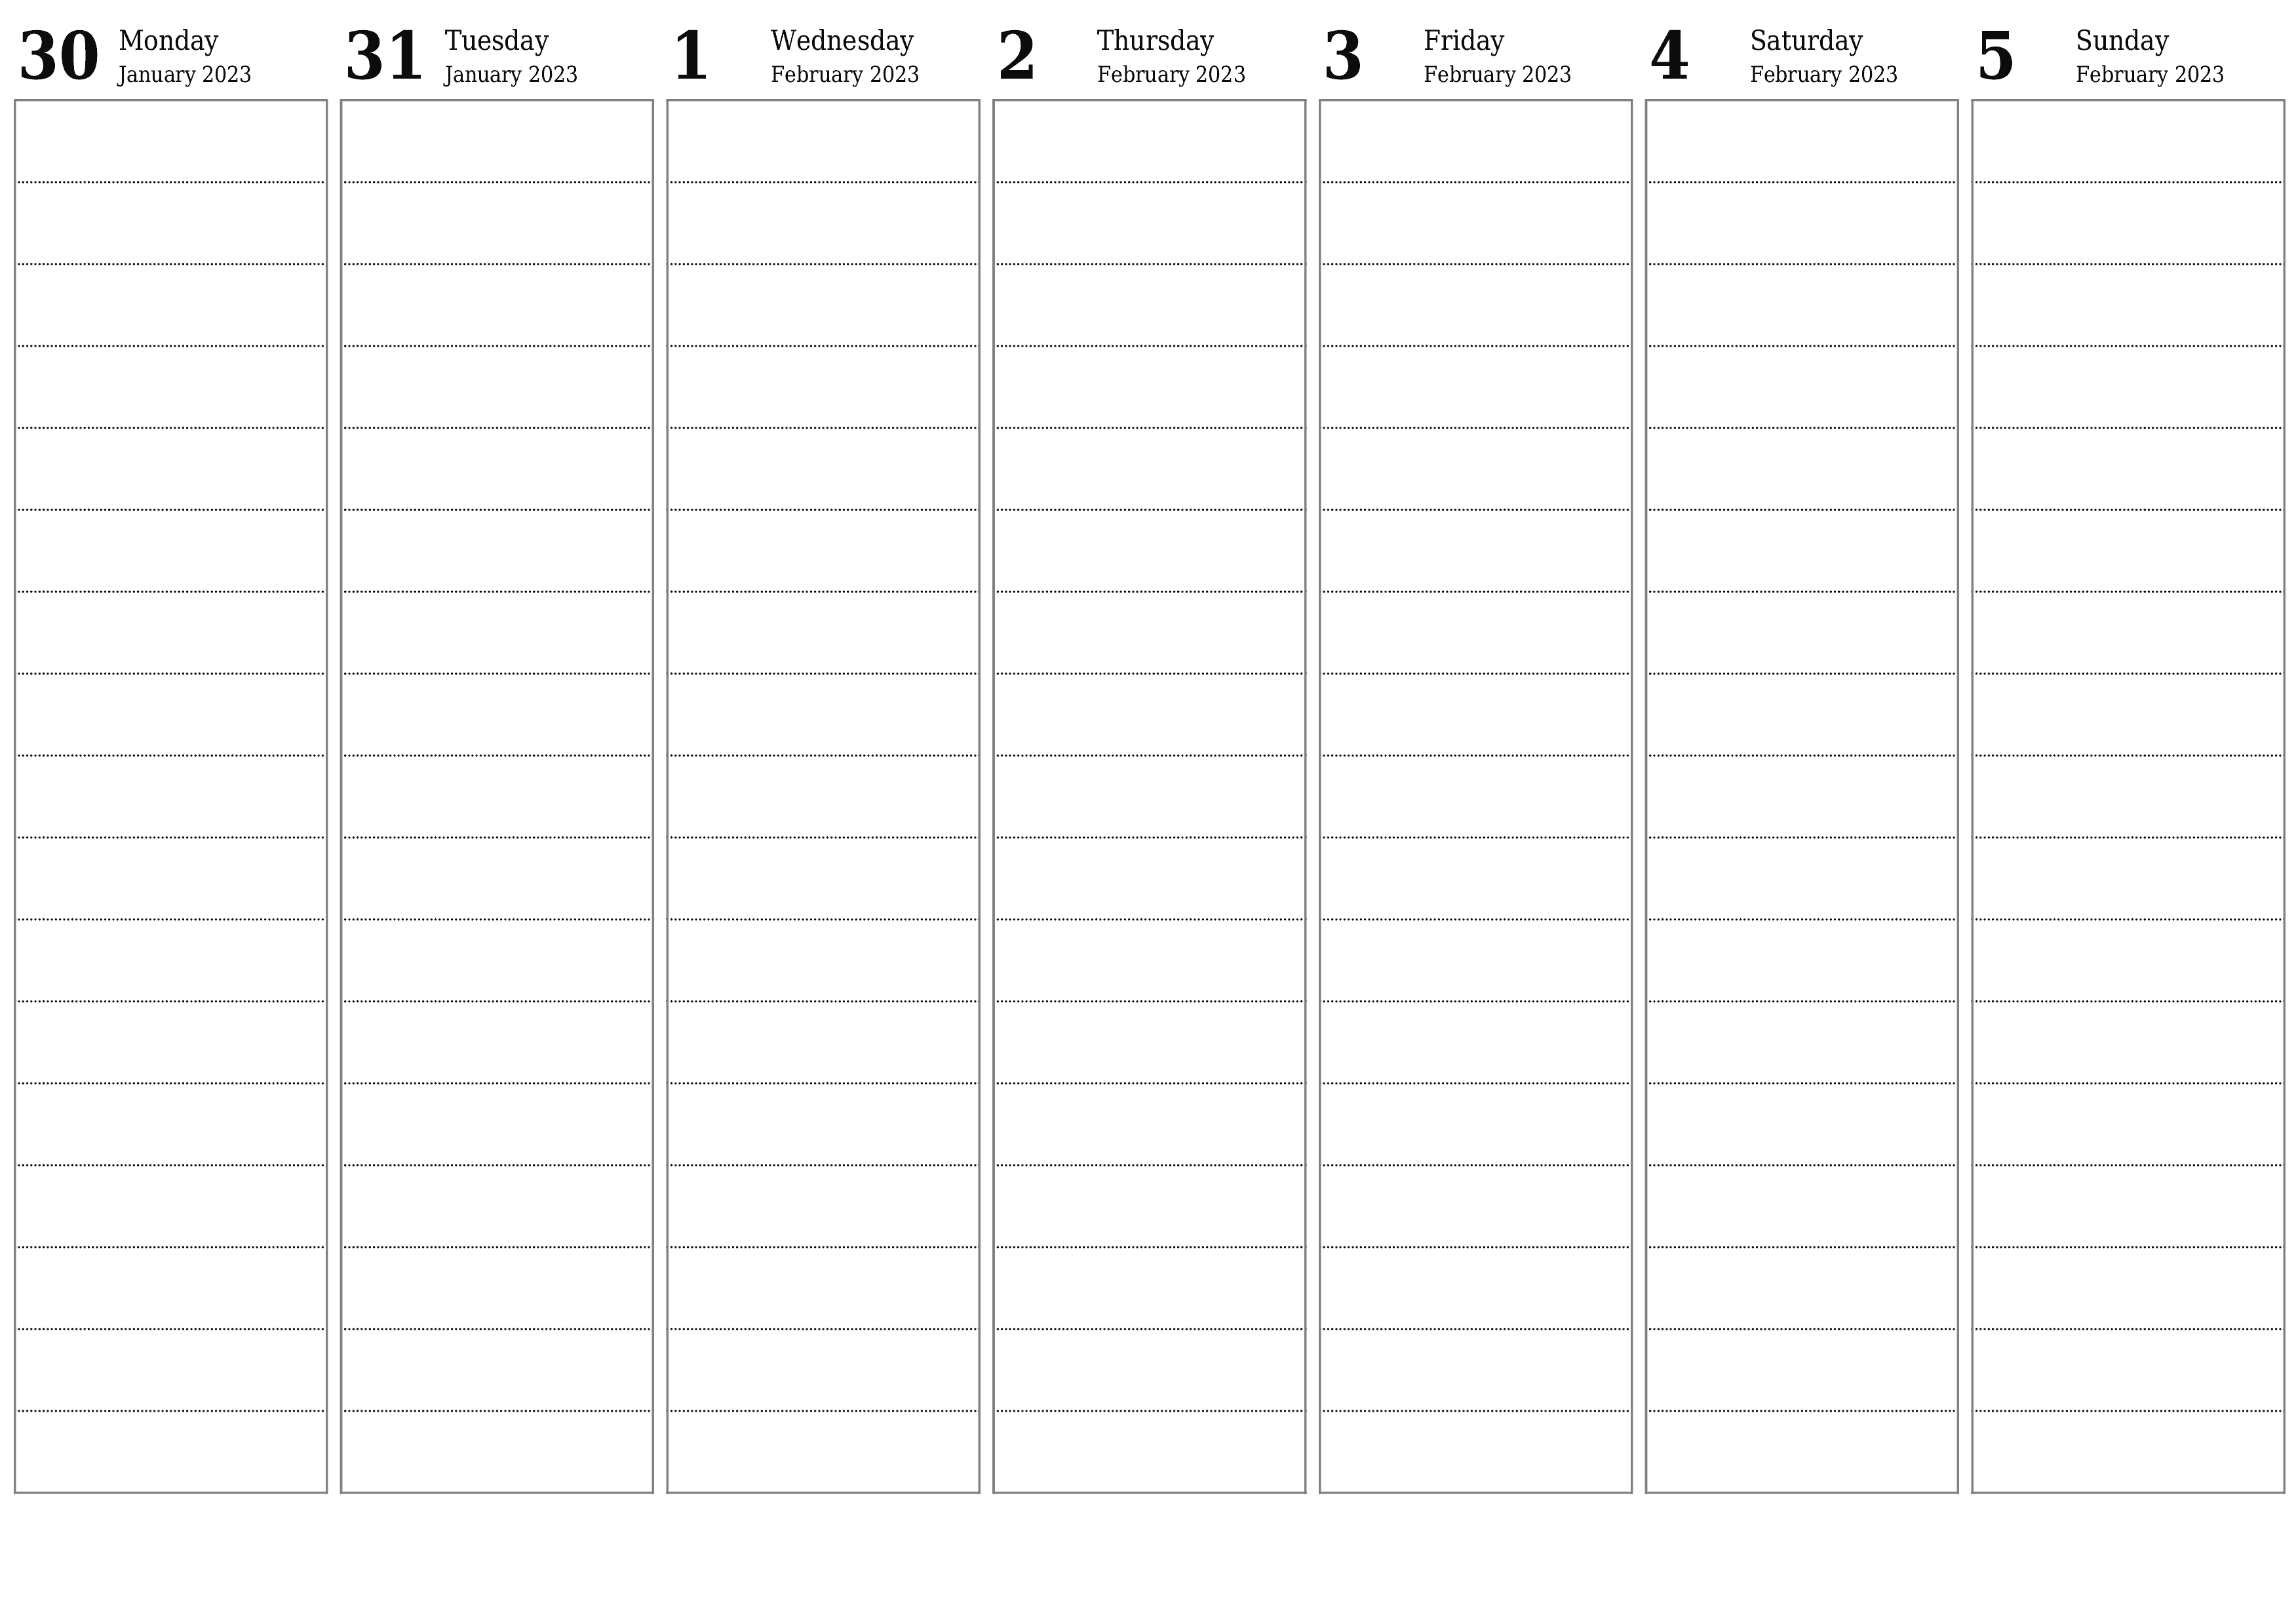 Blank weekly printable calendar and planner for week February 2023 with notes, save and print to PDF PNG English - 7calendar.com